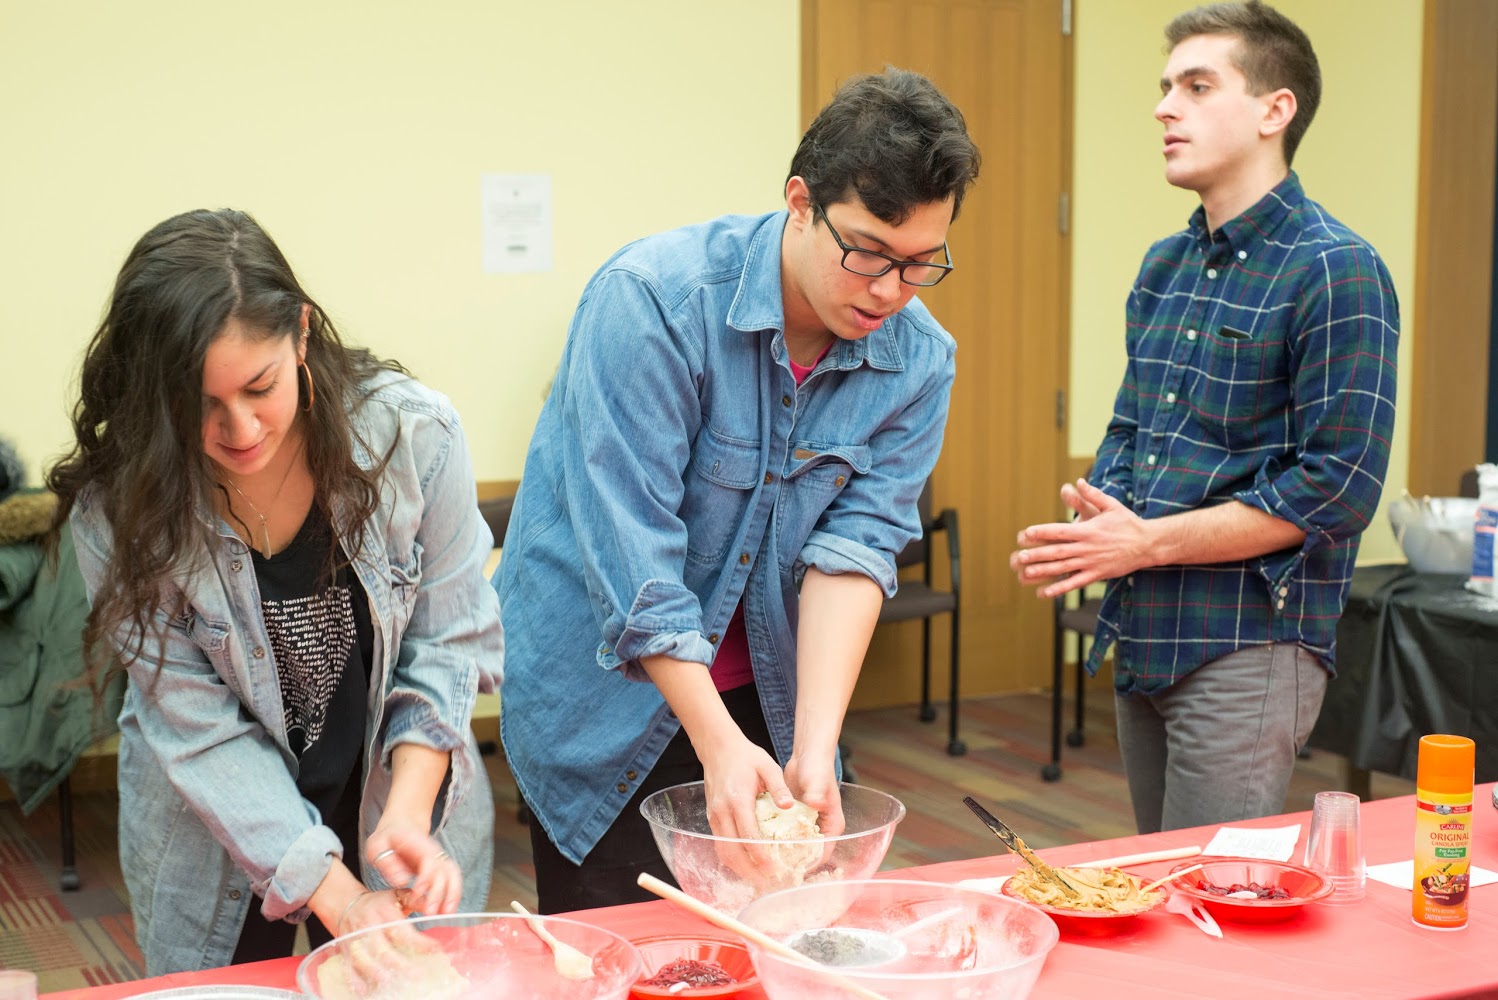 "Making hamantaschen from scratch is surprisingly simple, even for people like me who have no baking skills but still want to connect to a yummy tradition," Rebecca Seidel '15 said. "It was a great way to take a break from midterms while feeling a bit closer to home."